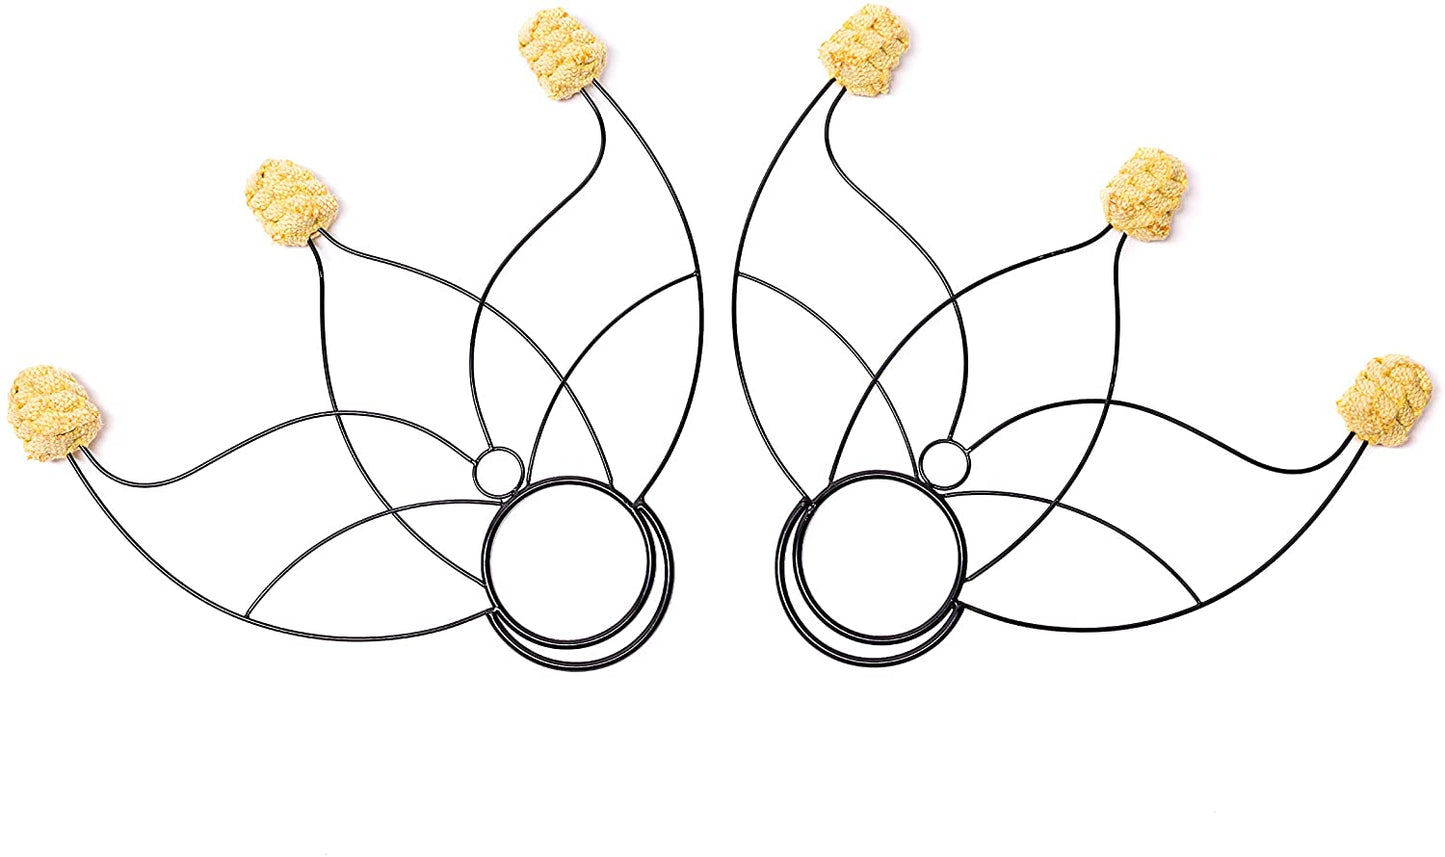 Fire Fans – Lotus Style – 3 Wicks – 1.5 Inch Woven Kevlar MoonBlaze Heads – Set of 2 – Lightweight – Beginner Level – Flow, Spinning, Circus, Dance Prop – for Festivals & Performances – by FIRE MECCA